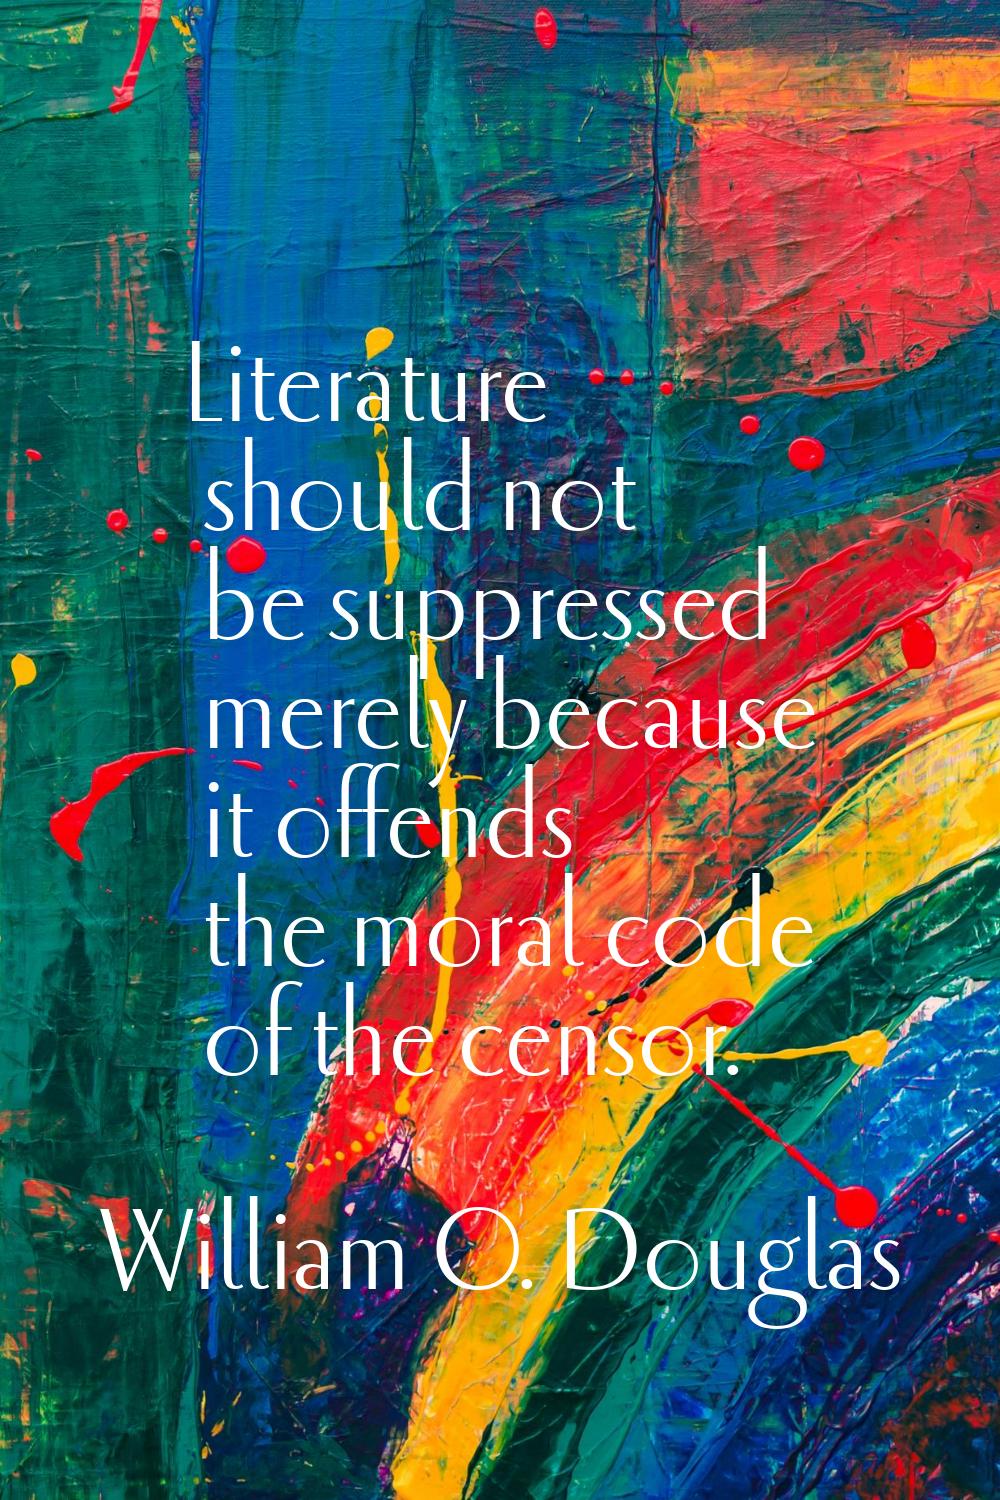 Literature should not be suppressed merely because it offends the moral code of the censor.